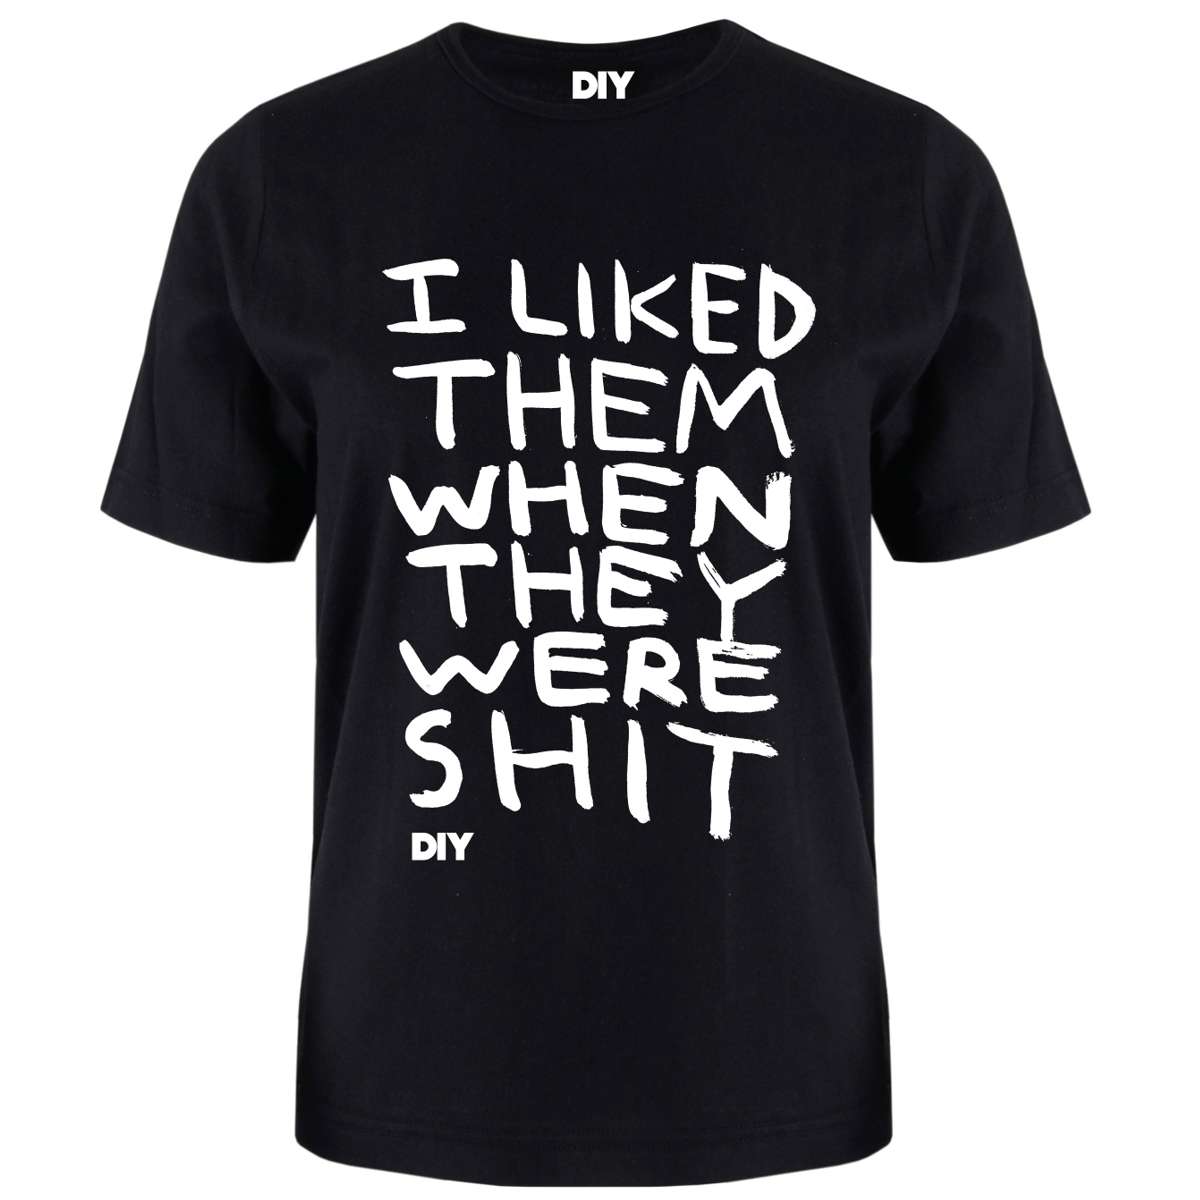 'I Liked Them When They Were Shit' T-shirt - DIY